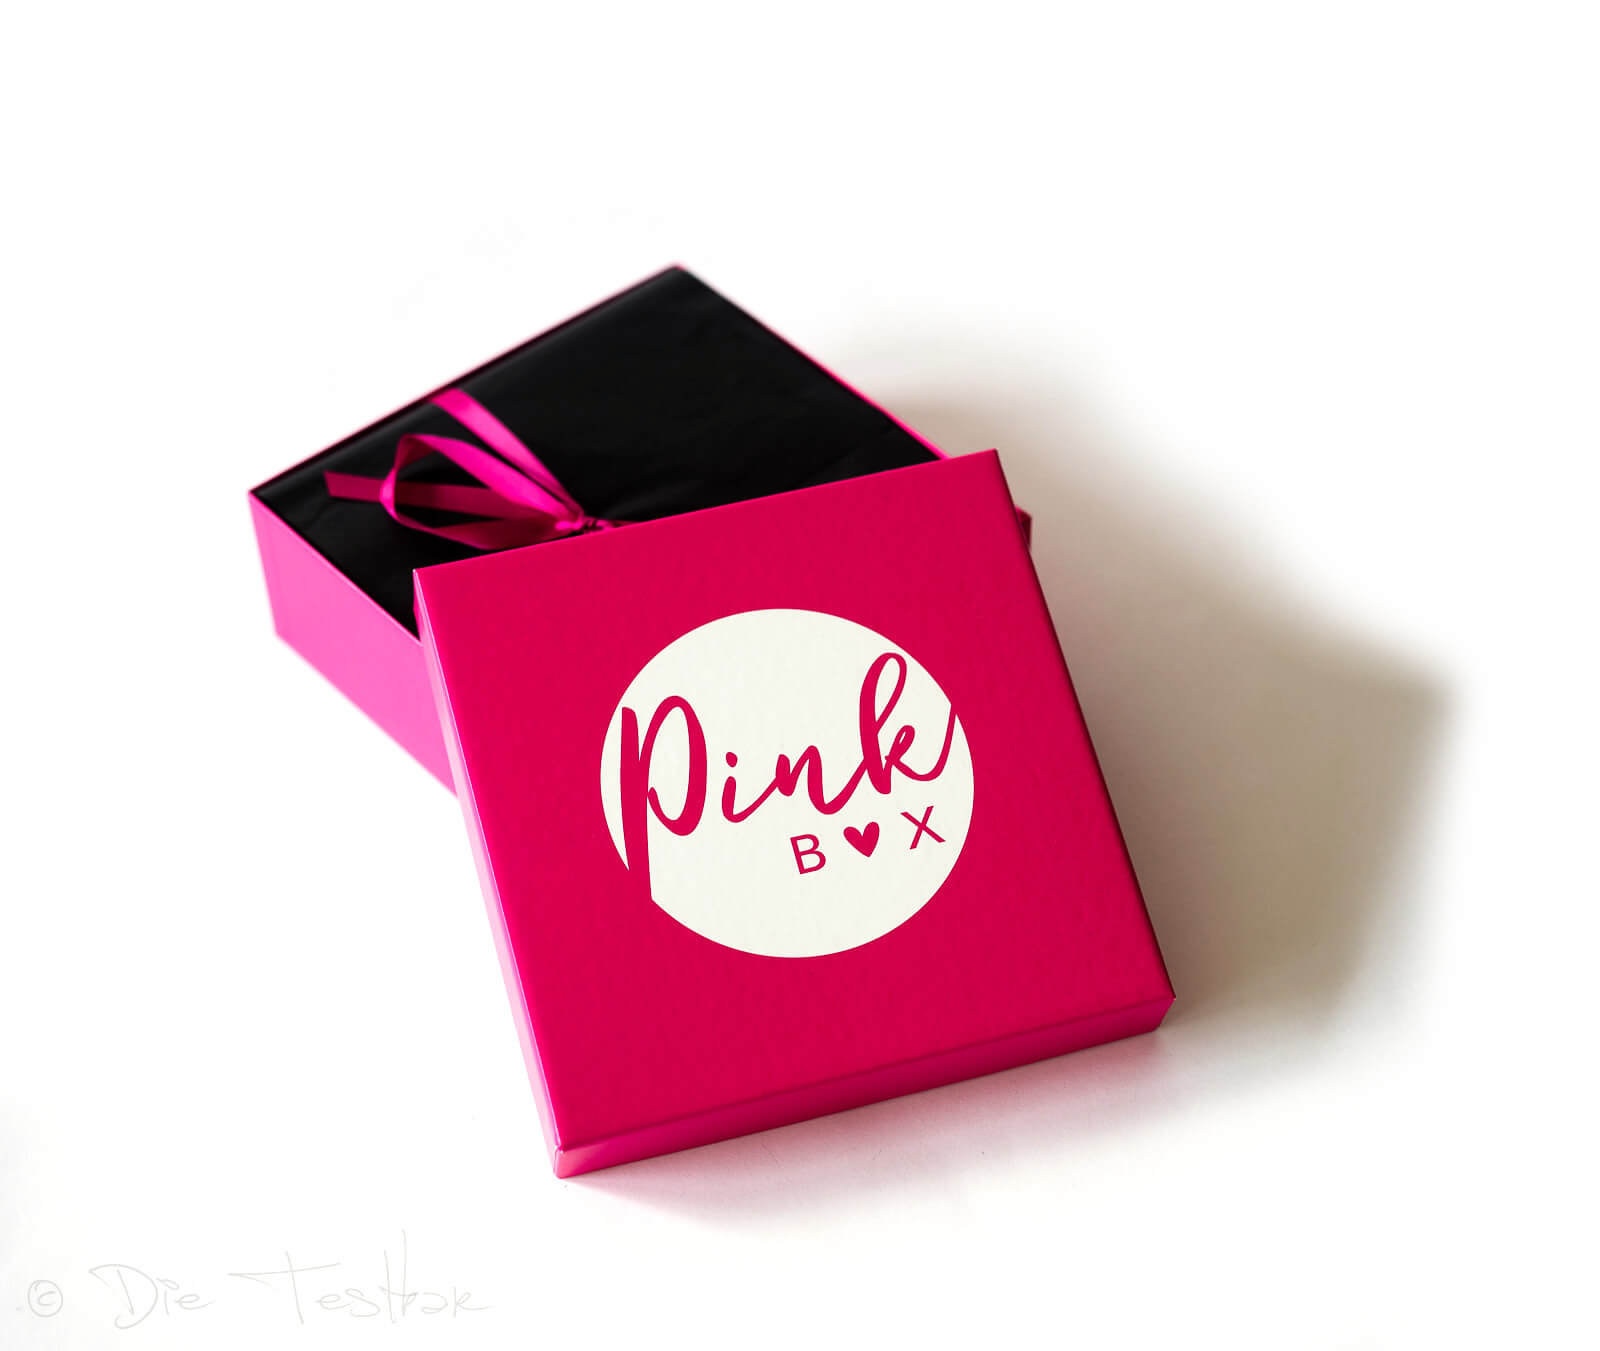 DIE PINK BOX im Dezember 2019 – Pink Box New Year - New You 2020